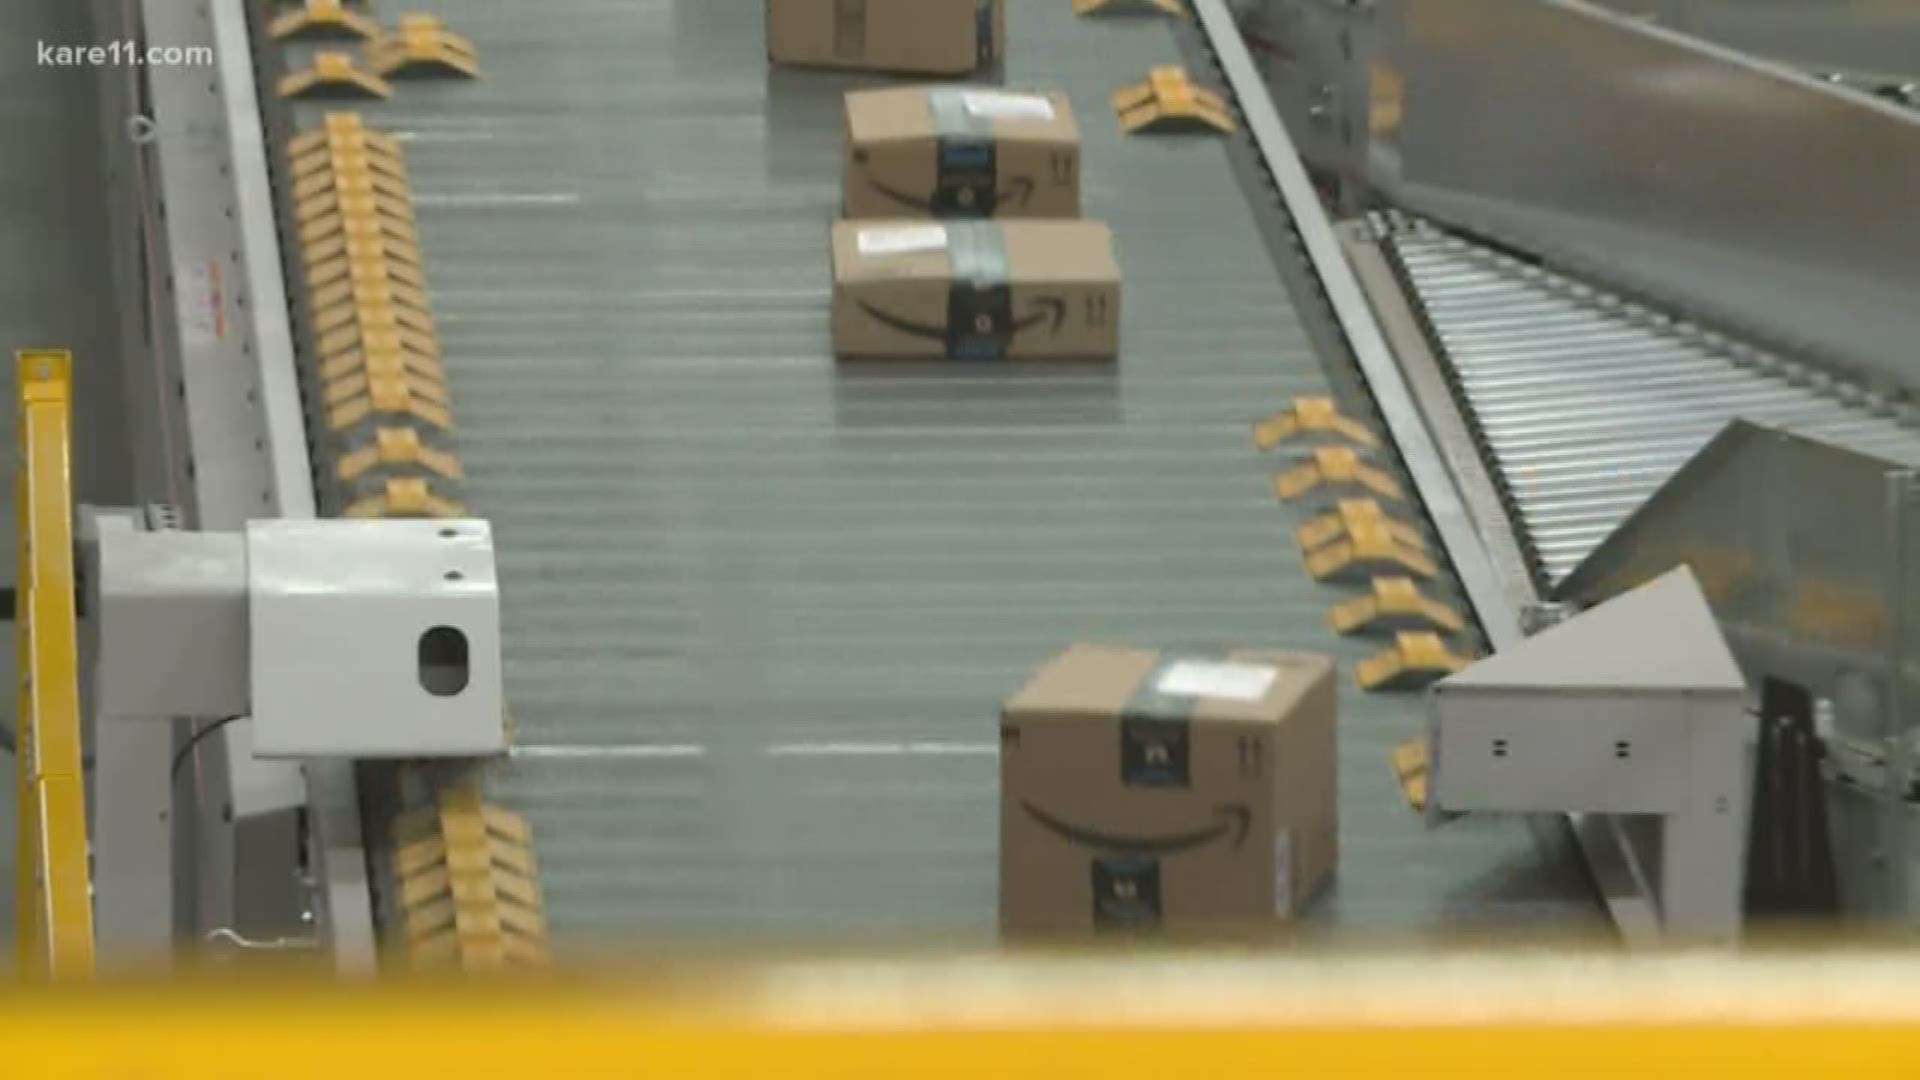 On Friday at 4 p.m., workers plan to rally outside the Amazon fulfillment center in Shakopee. The working conditions are inhumane, employees said, and now they're demanding change. https://kare11.tv/2SQfg2p